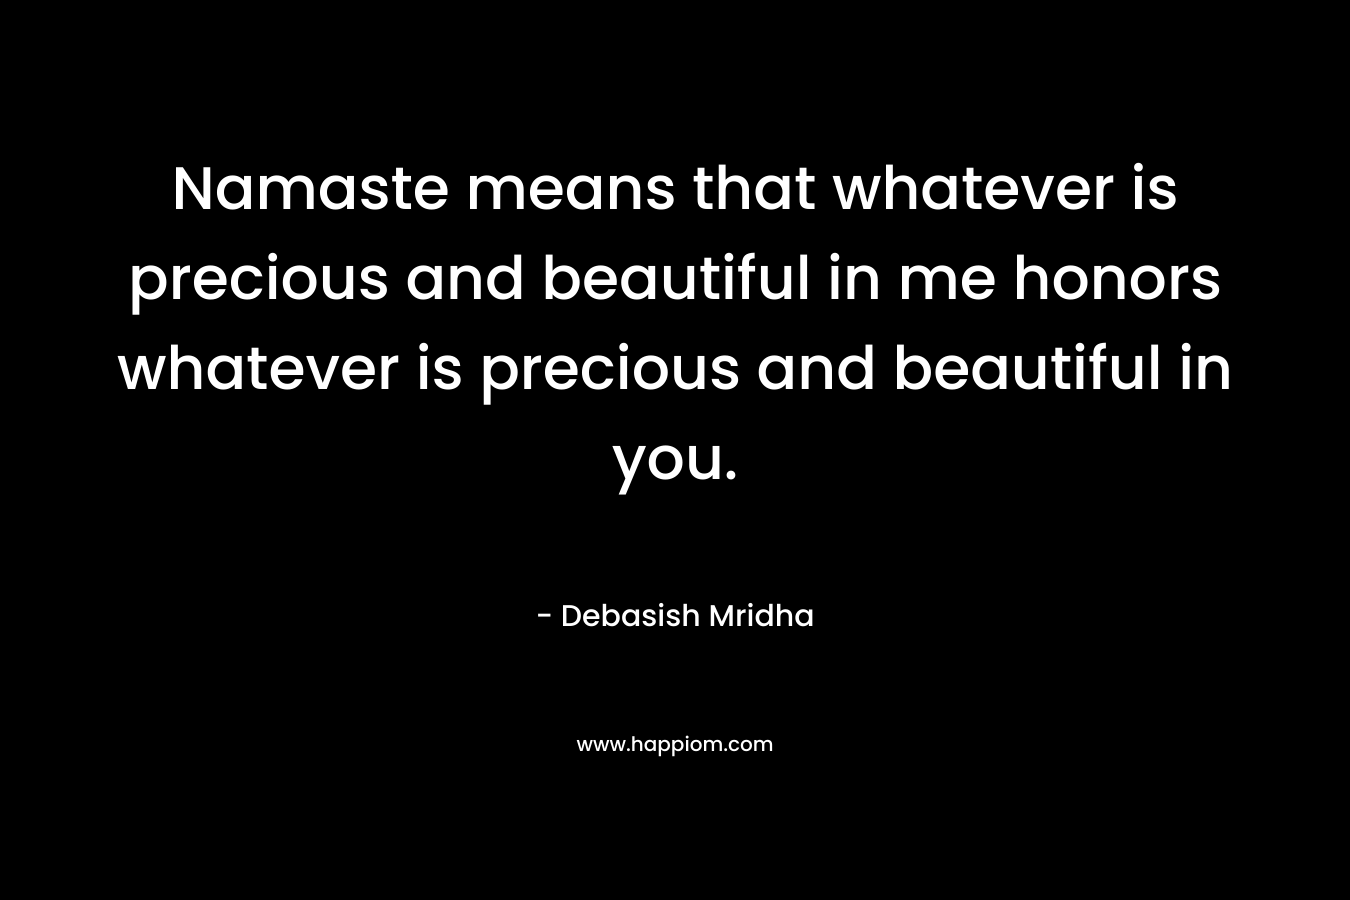 Namaste means that whatever is precious and beautiful in me honors whatever is precious and beautiful in you.